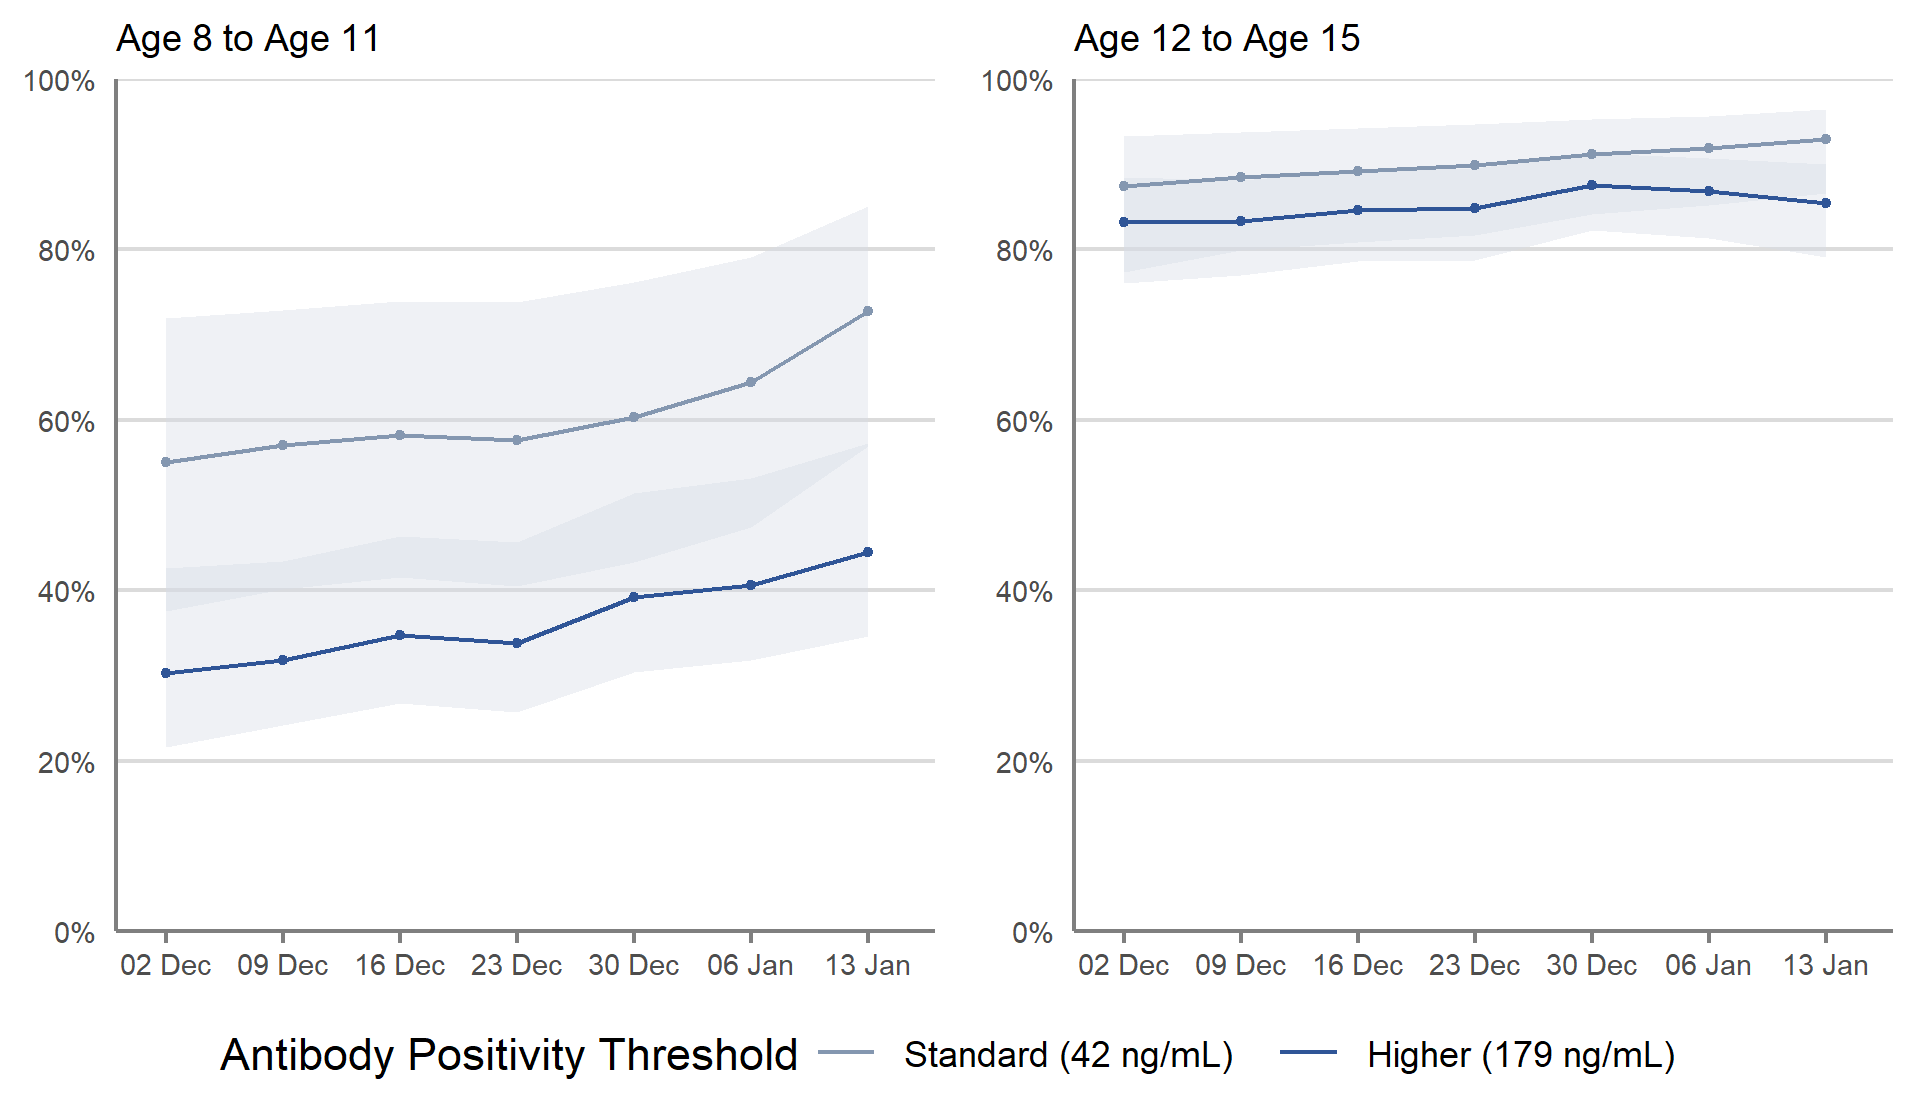 Figure 4: Modelled weekly percentage of children (under 16 years) living in private residential households testing positive for antibodies to SARS-CoV-2 from a blood sample, by age group, from 29 November 2021 to the week beginning 10 January 2022, including 95% credible intervals